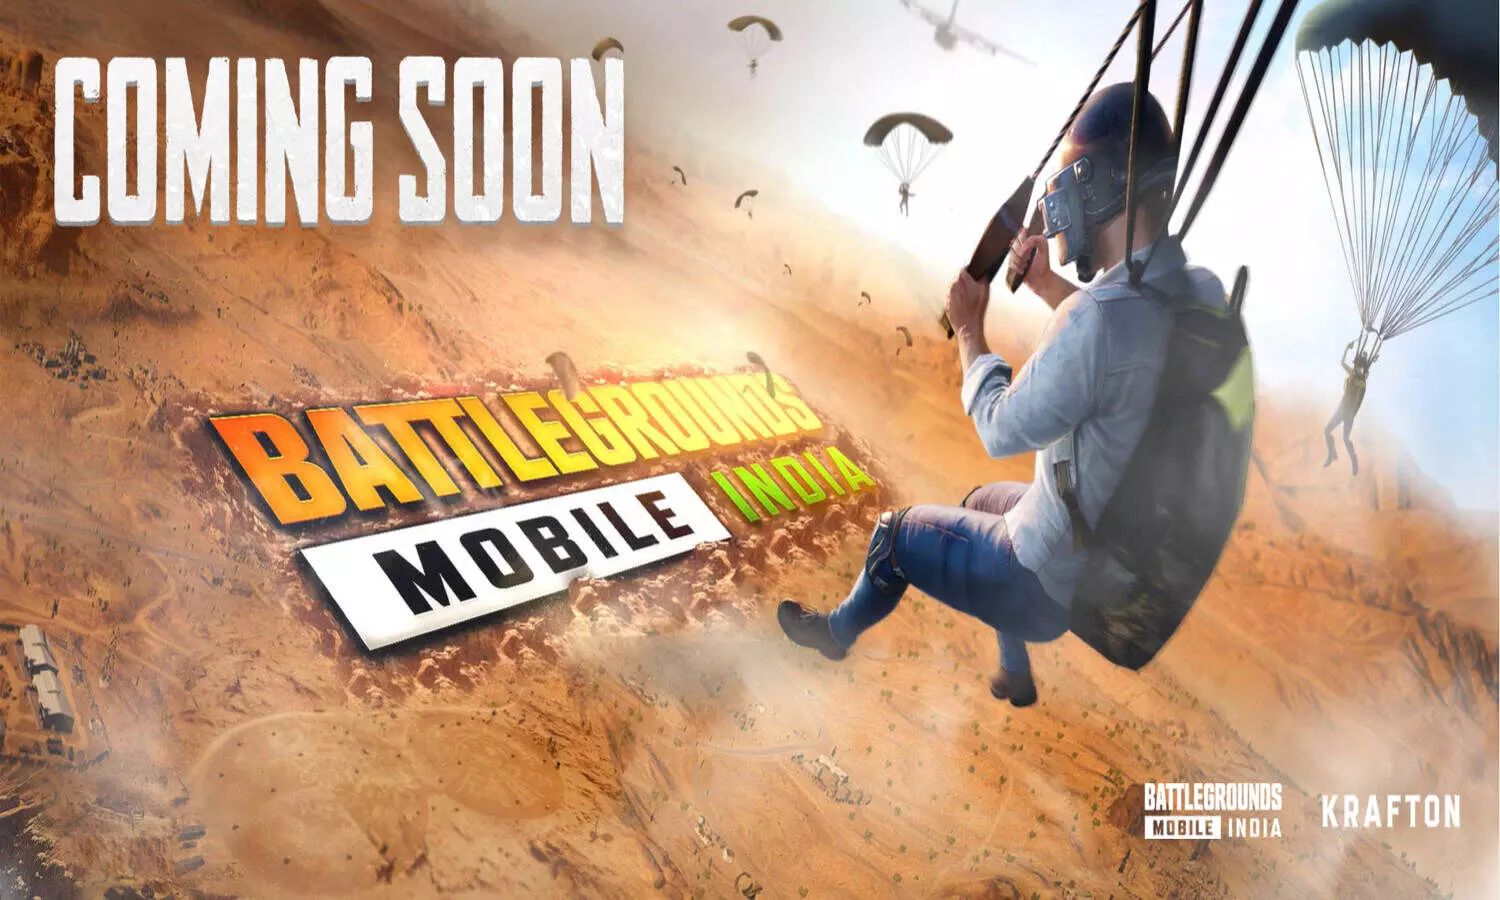 Battlegrounds Mobile India: Krafton is all set to stream iOS release